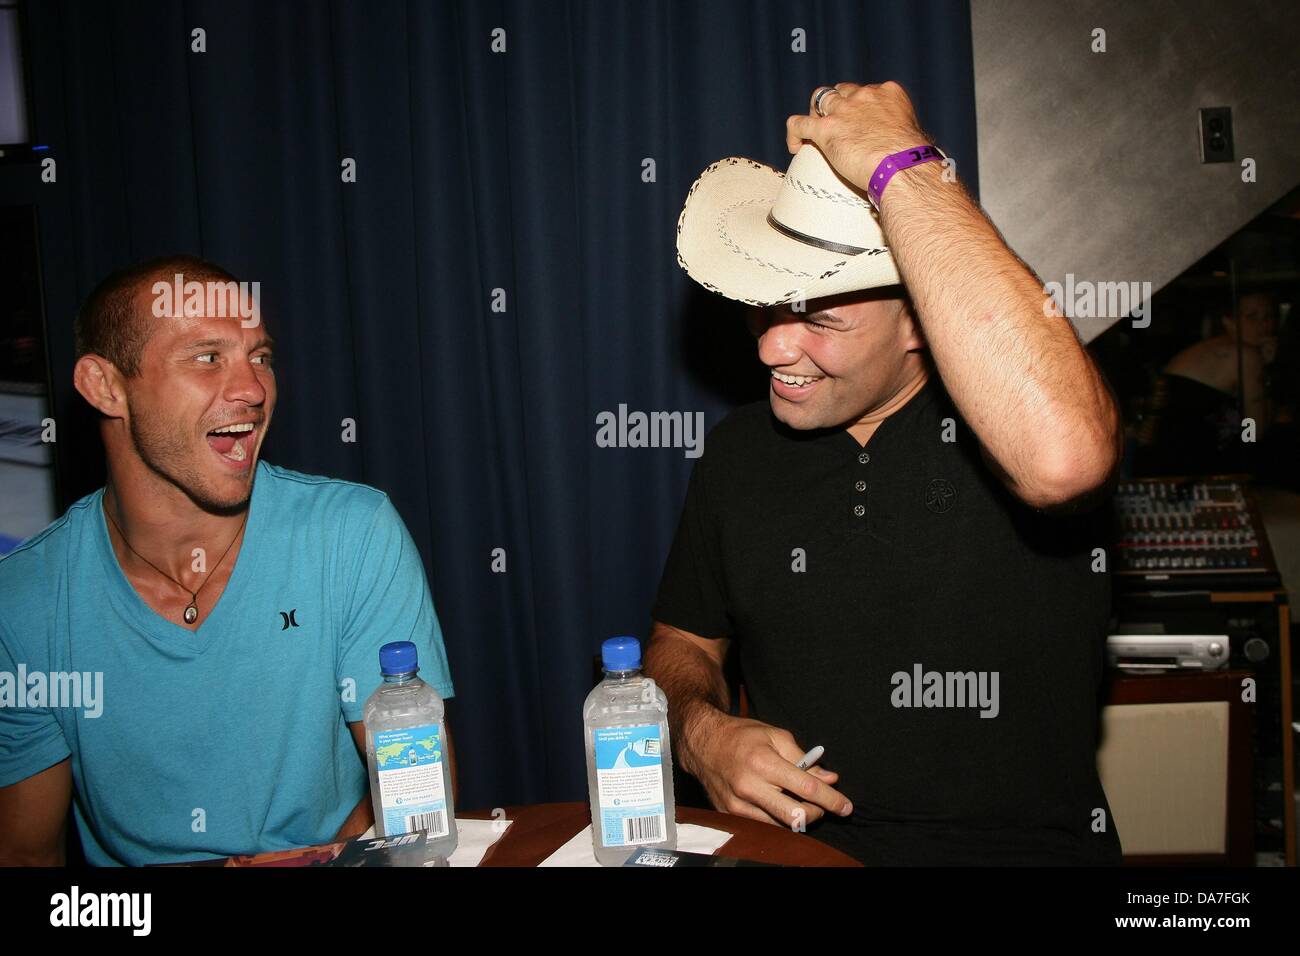 Las Vegas, NV. 5th July, 2013. Donald 'Cowboy' Cerrone, Cain Velasquez at arrivals for UFC Fight Week Pre-Fight Party for MMA Fans, Lagasse's Stadium at The Palazzo Resort Hotel Casino, Las Vegas, NV July 5, 2013. Credit:  James Atoa/Everett Collection/Alamy Live News Stock Photo